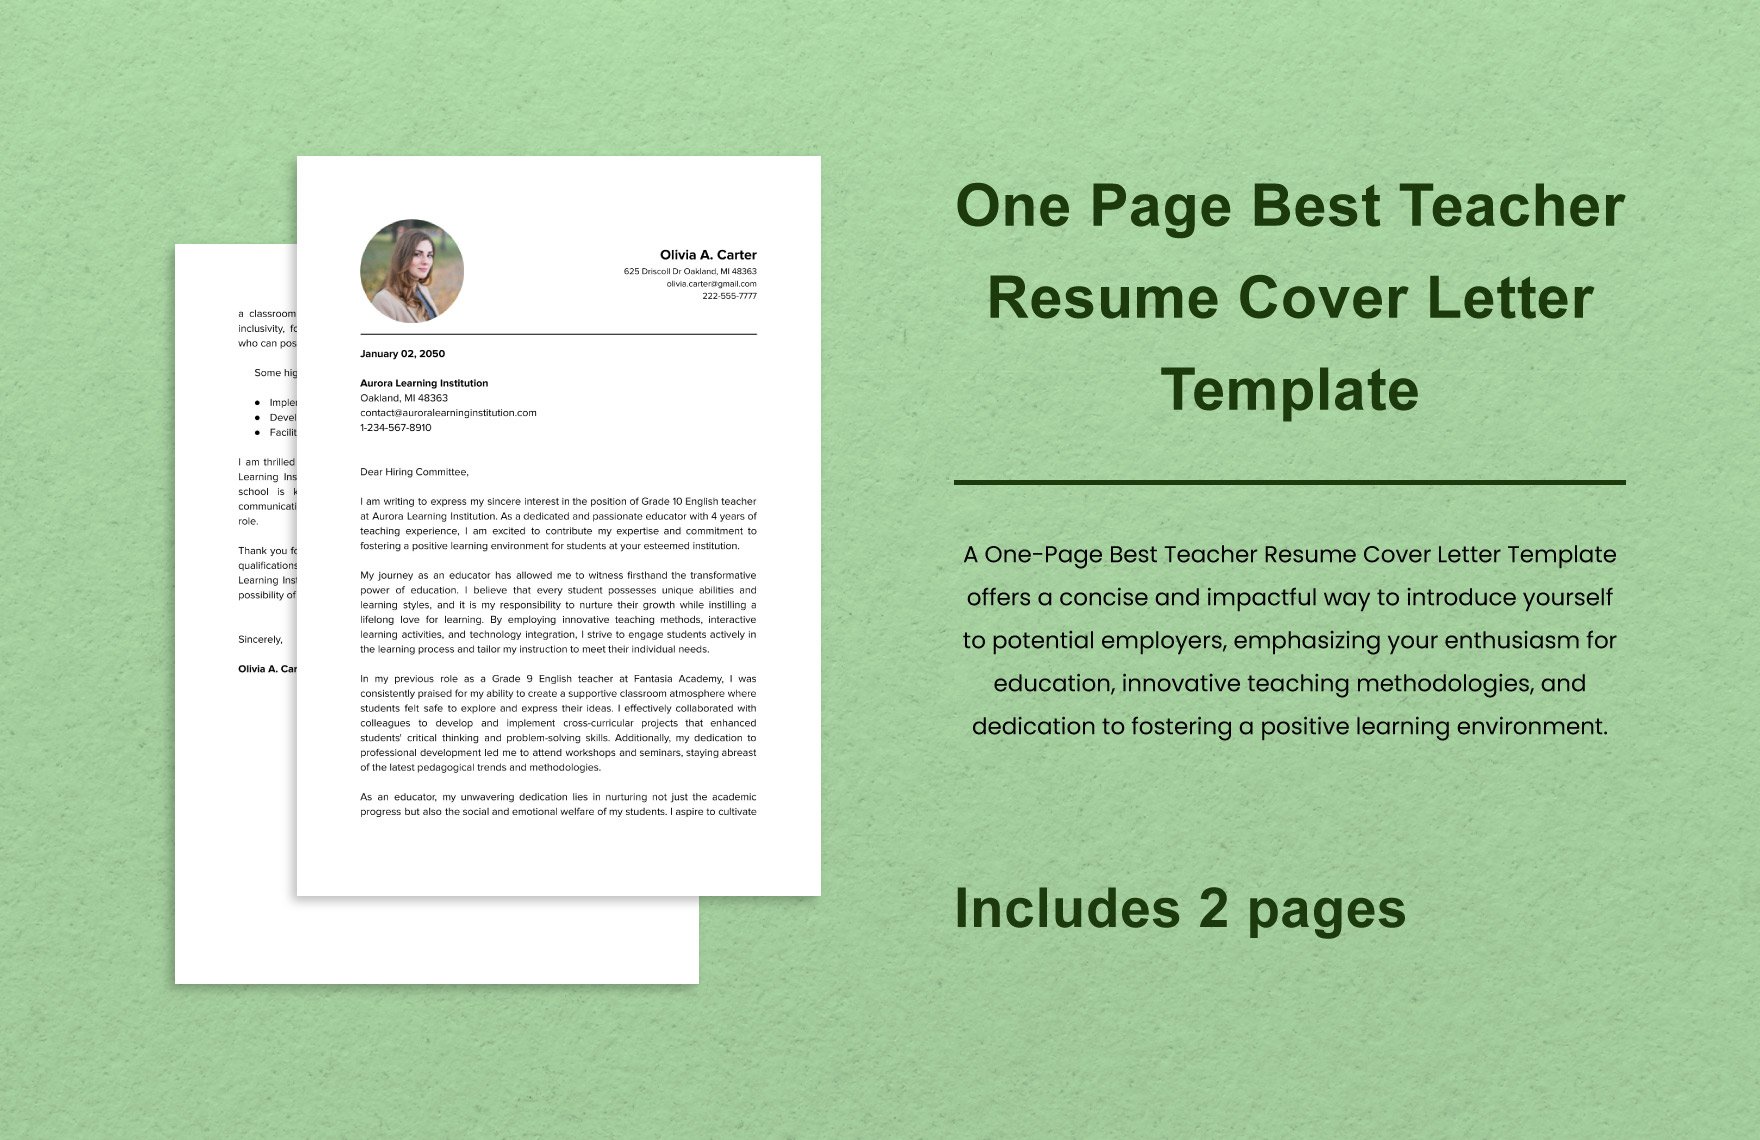 One Page Best Teacher Resume Cover Letter Template